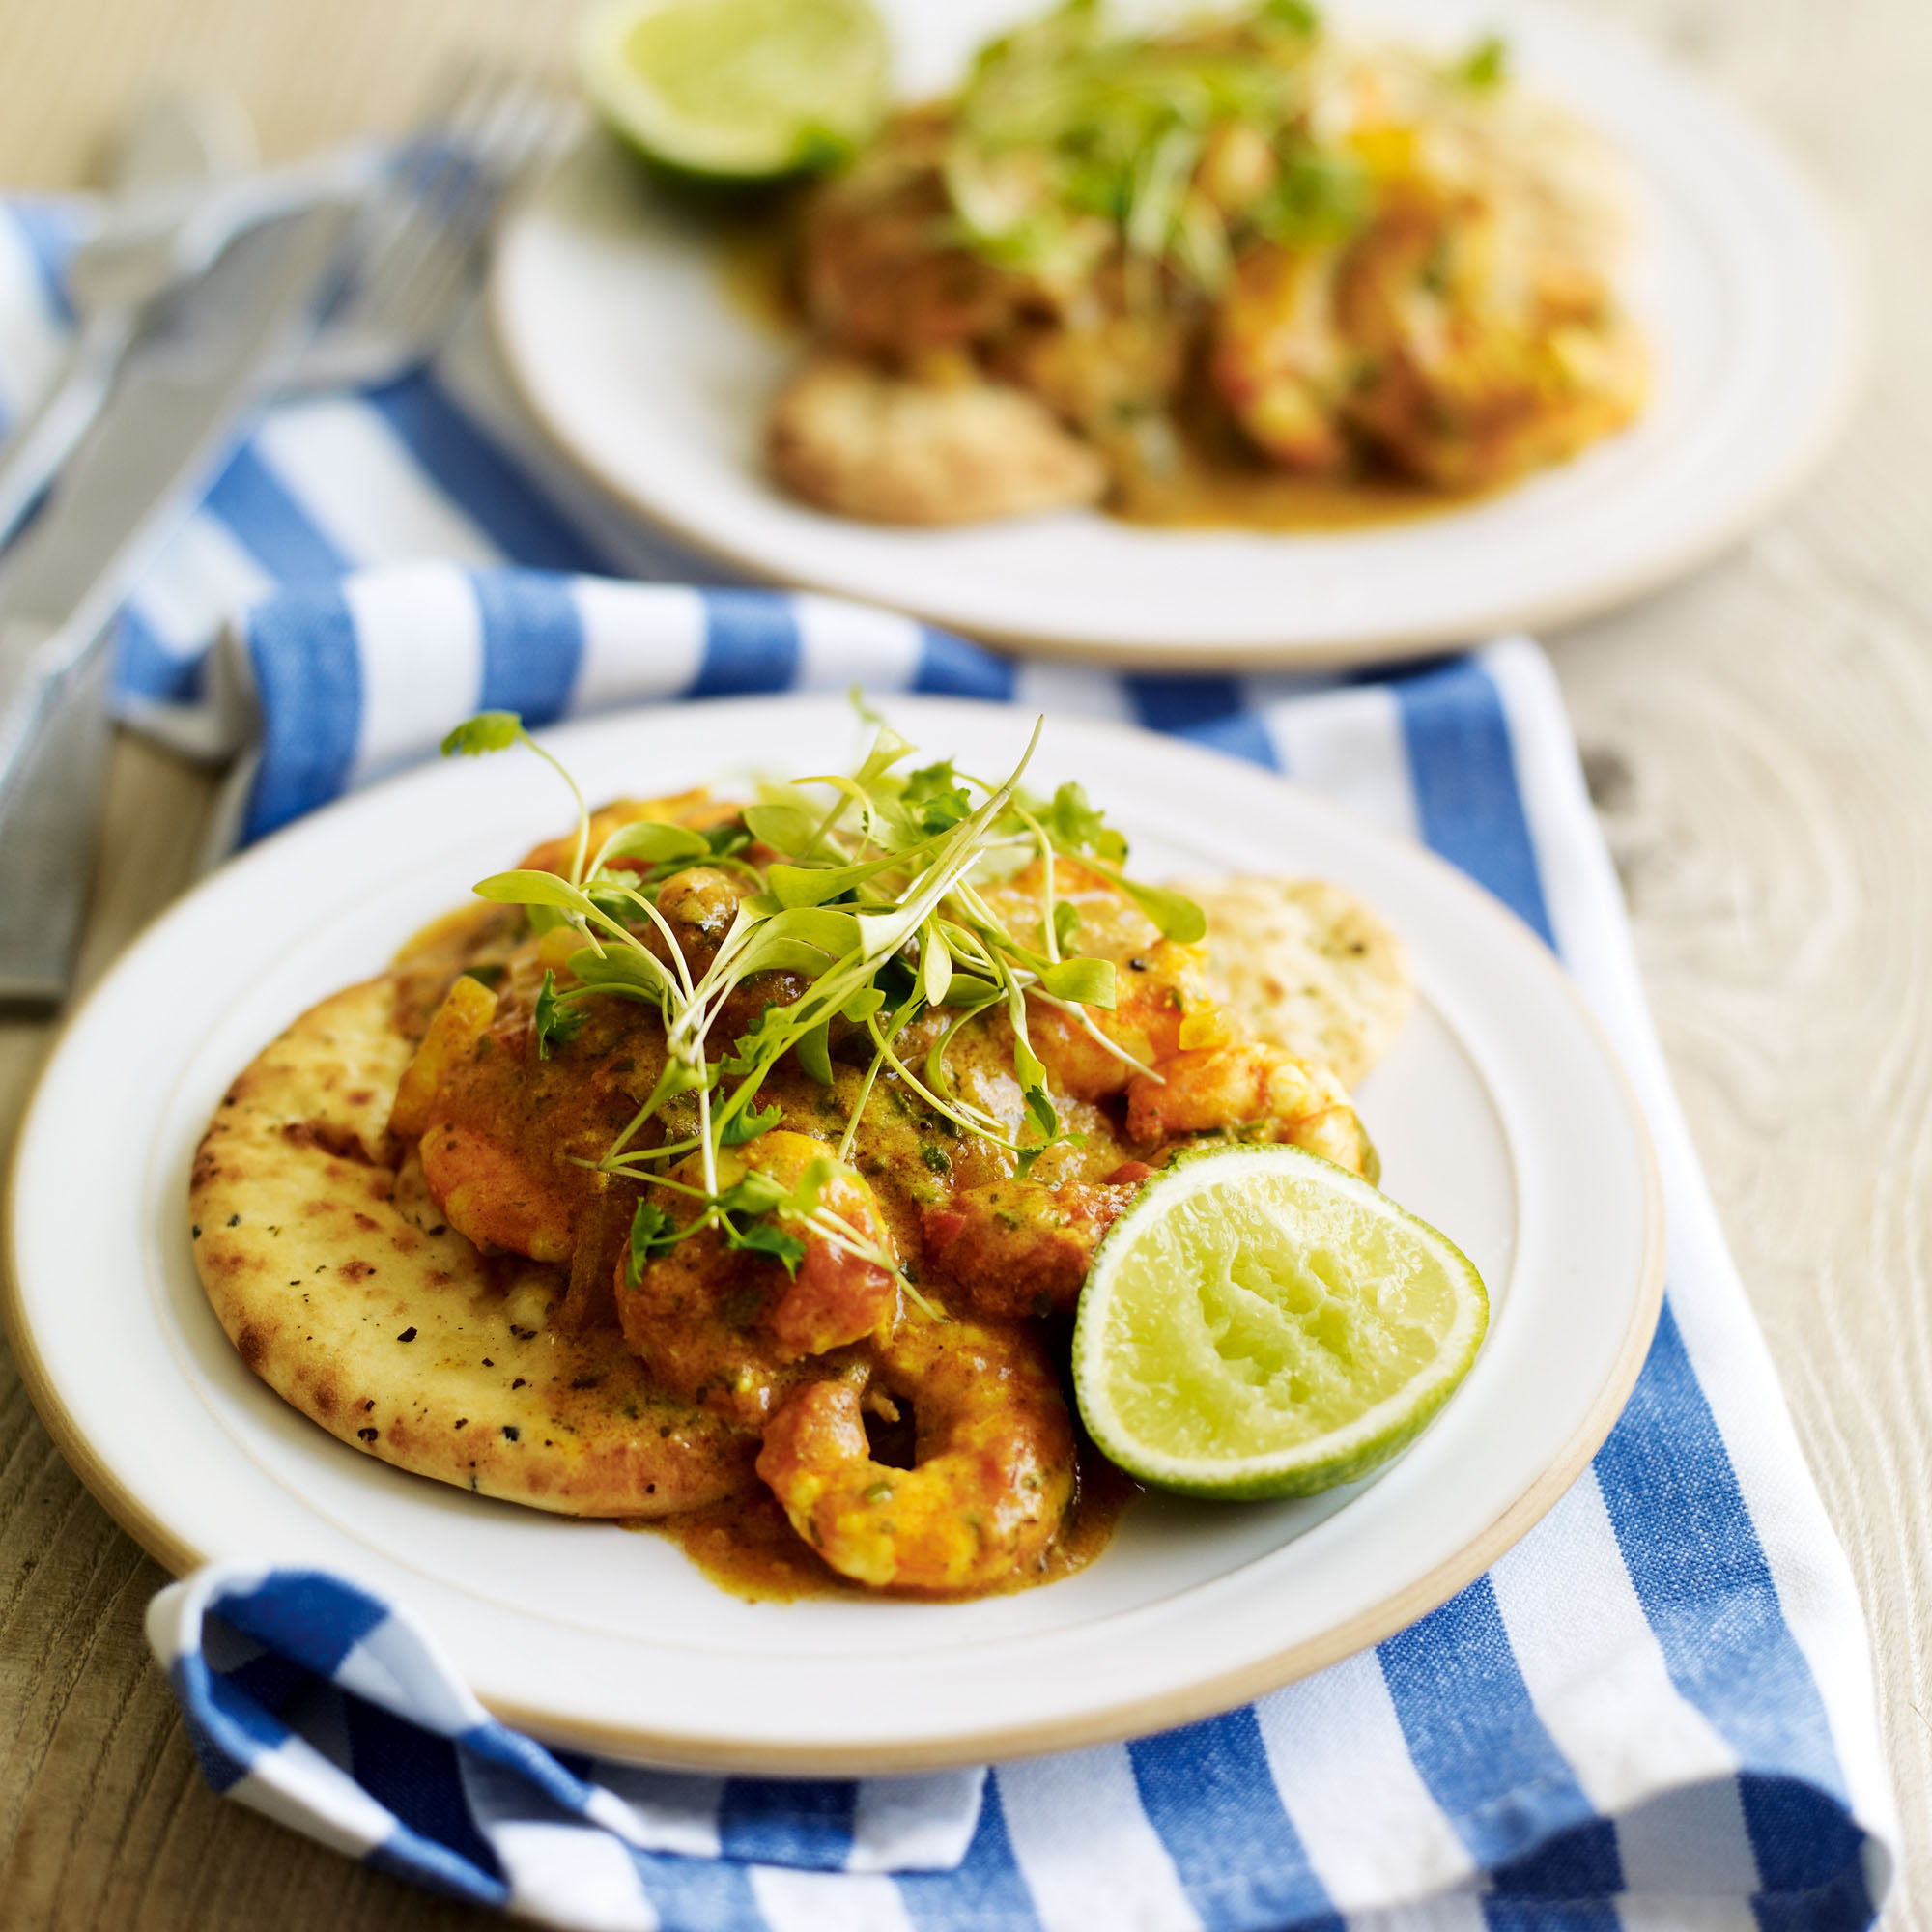 Prawn and coconut balti curry with naan bread recipe